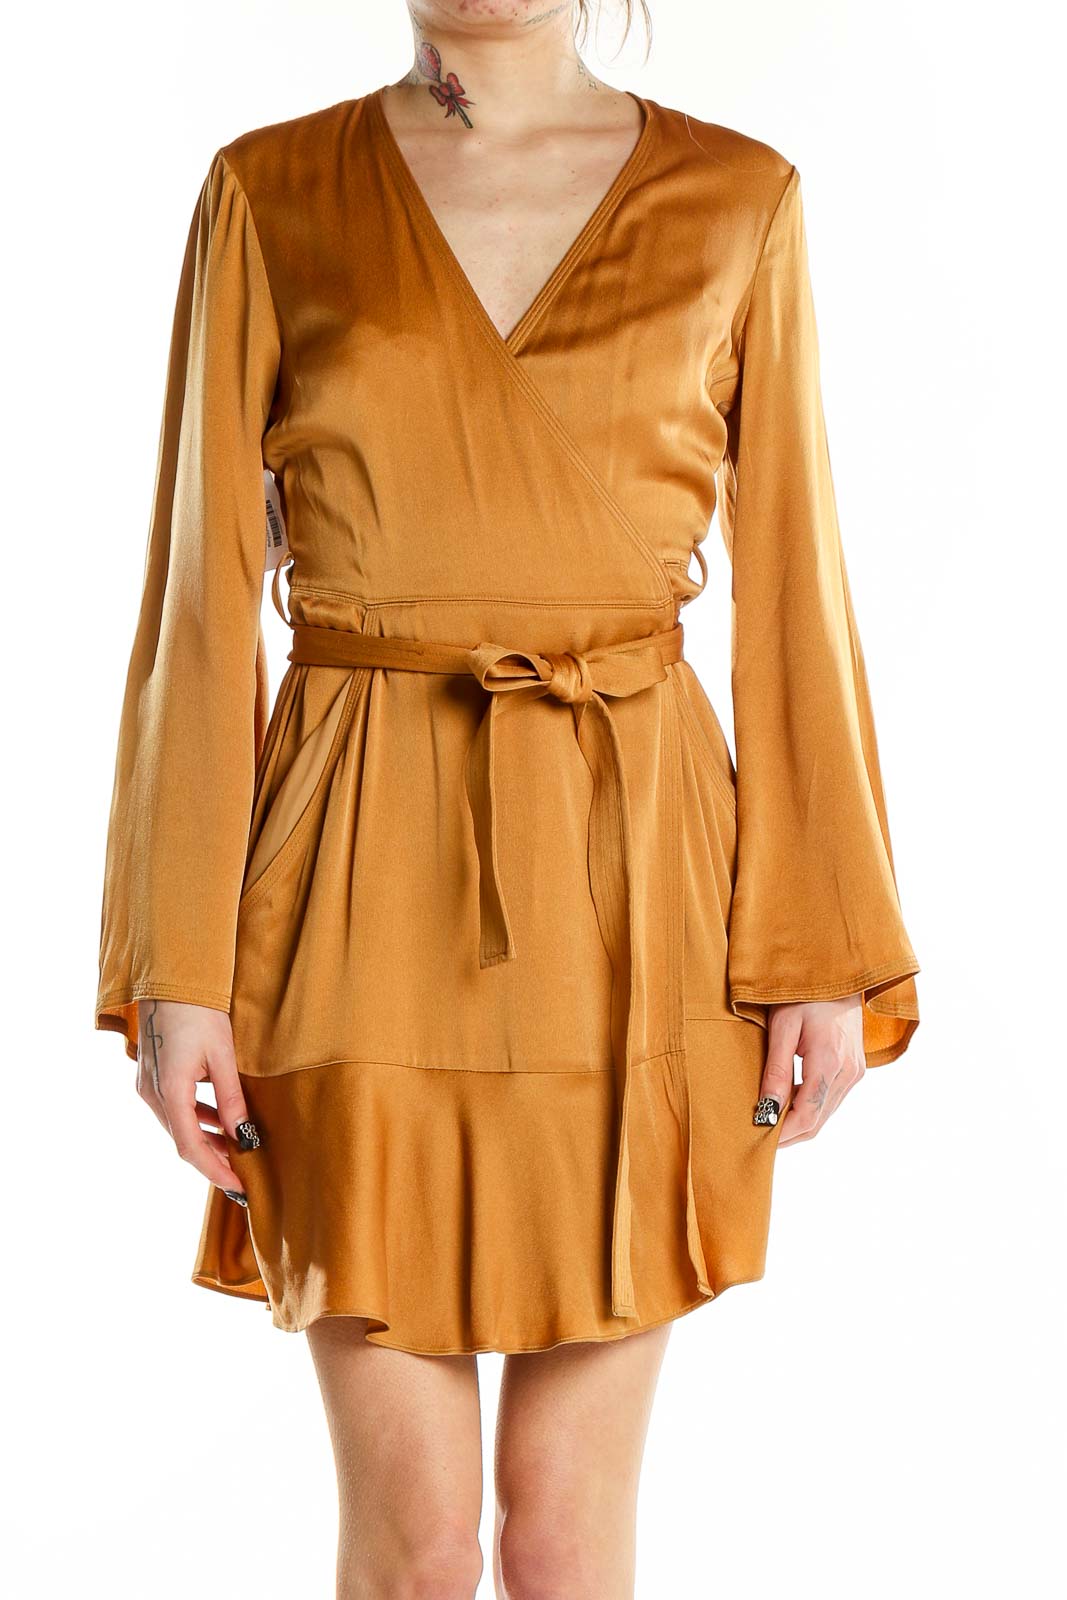 Gold Flare Ruffle Cocktail Dress Front